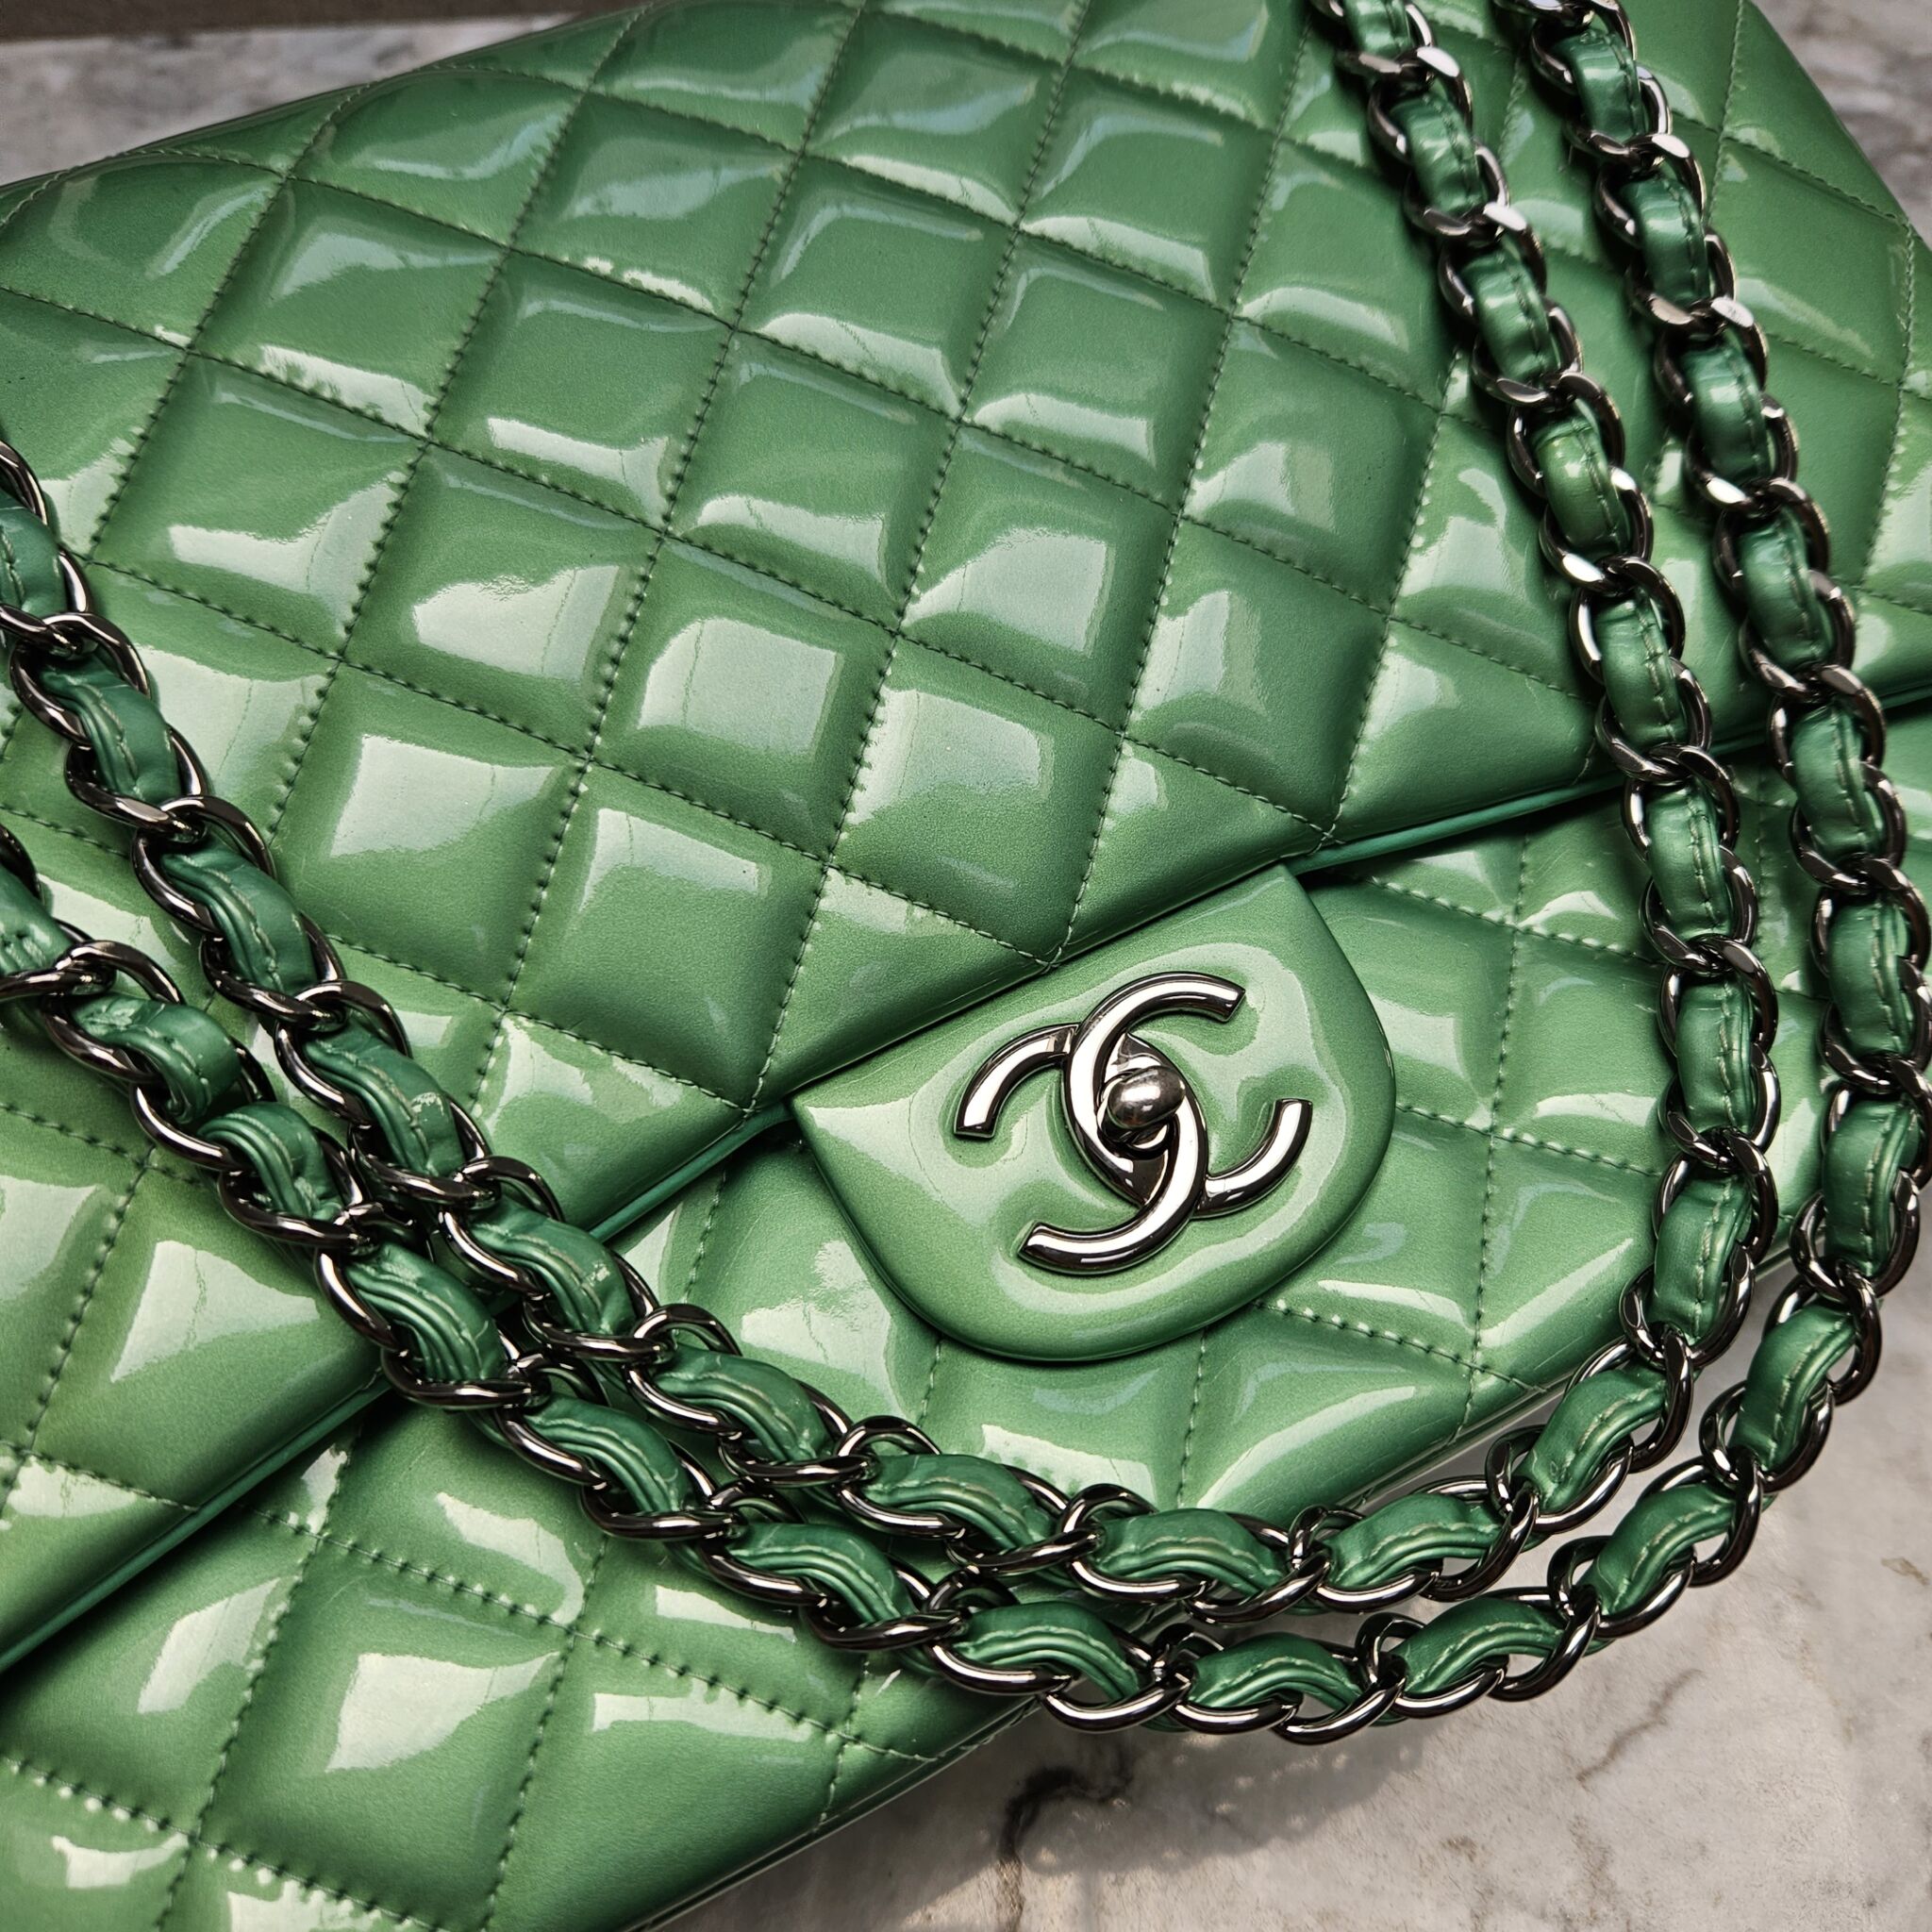 Chanel Mint Green Quilted Patent Leather Medium Classic Double Flap Bag  Chanel | The Luxury Closet